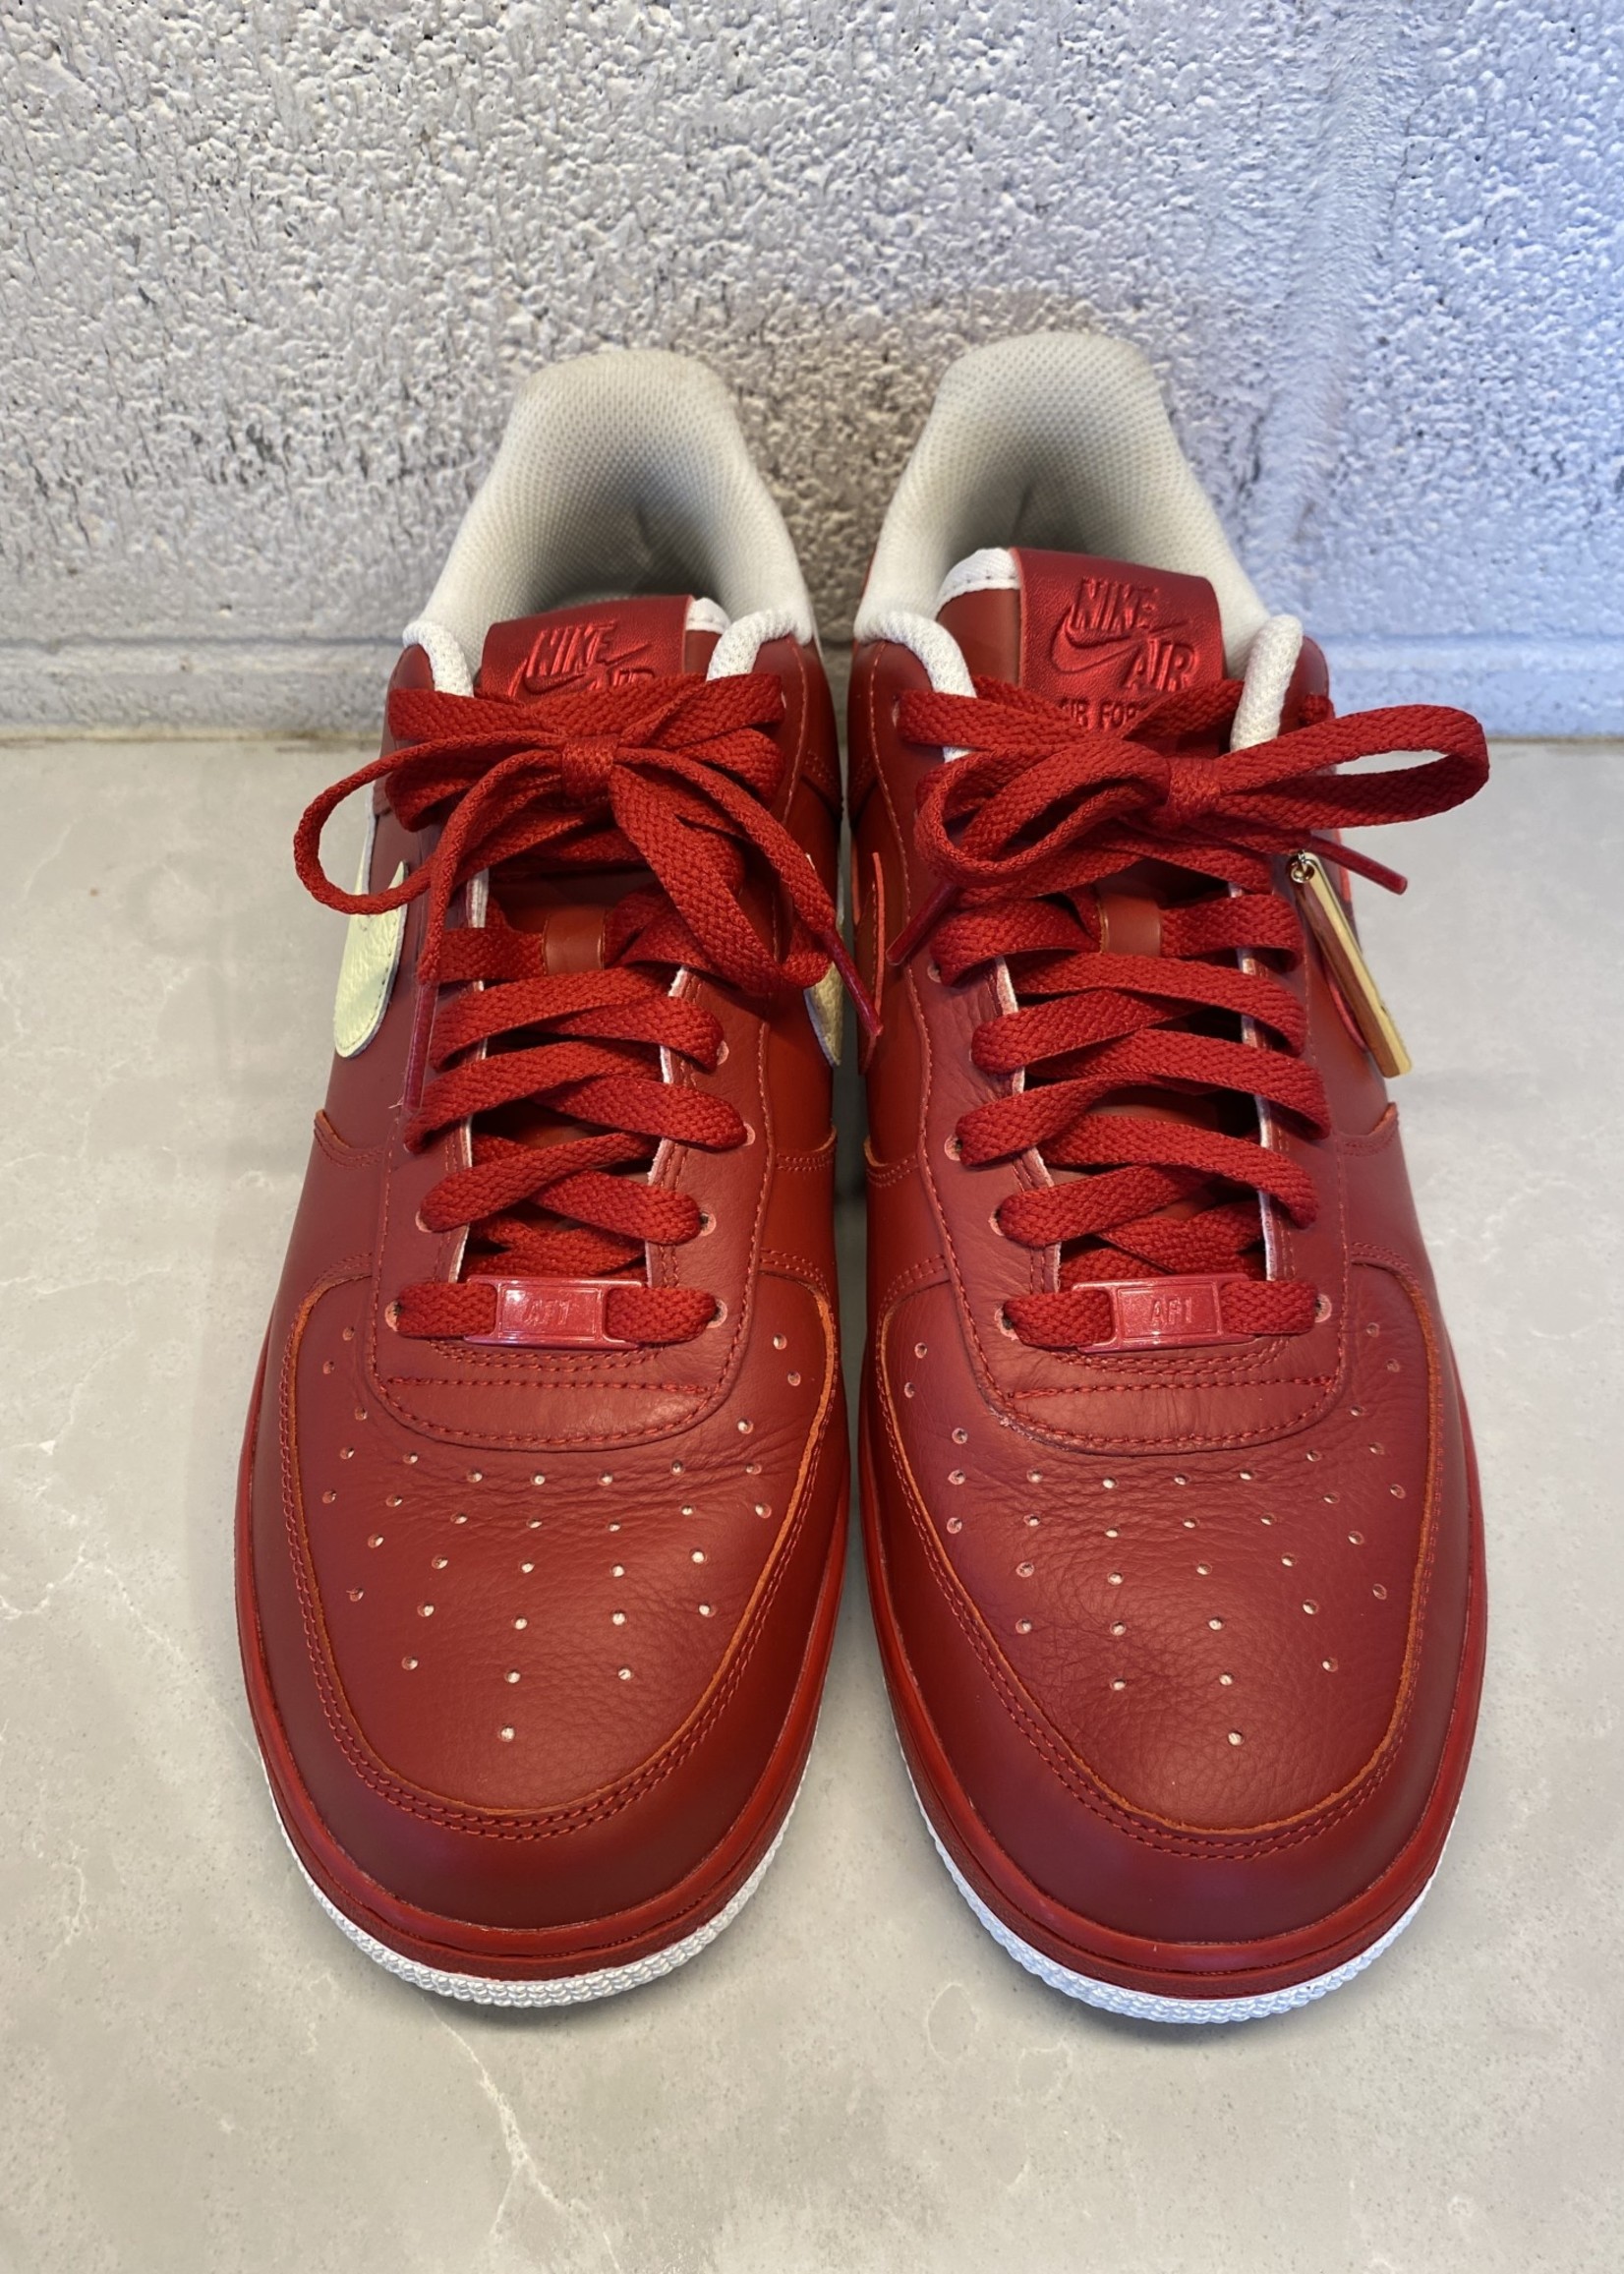 Nike Anniversery Red ID Air Force 1 Sneakers Size 10